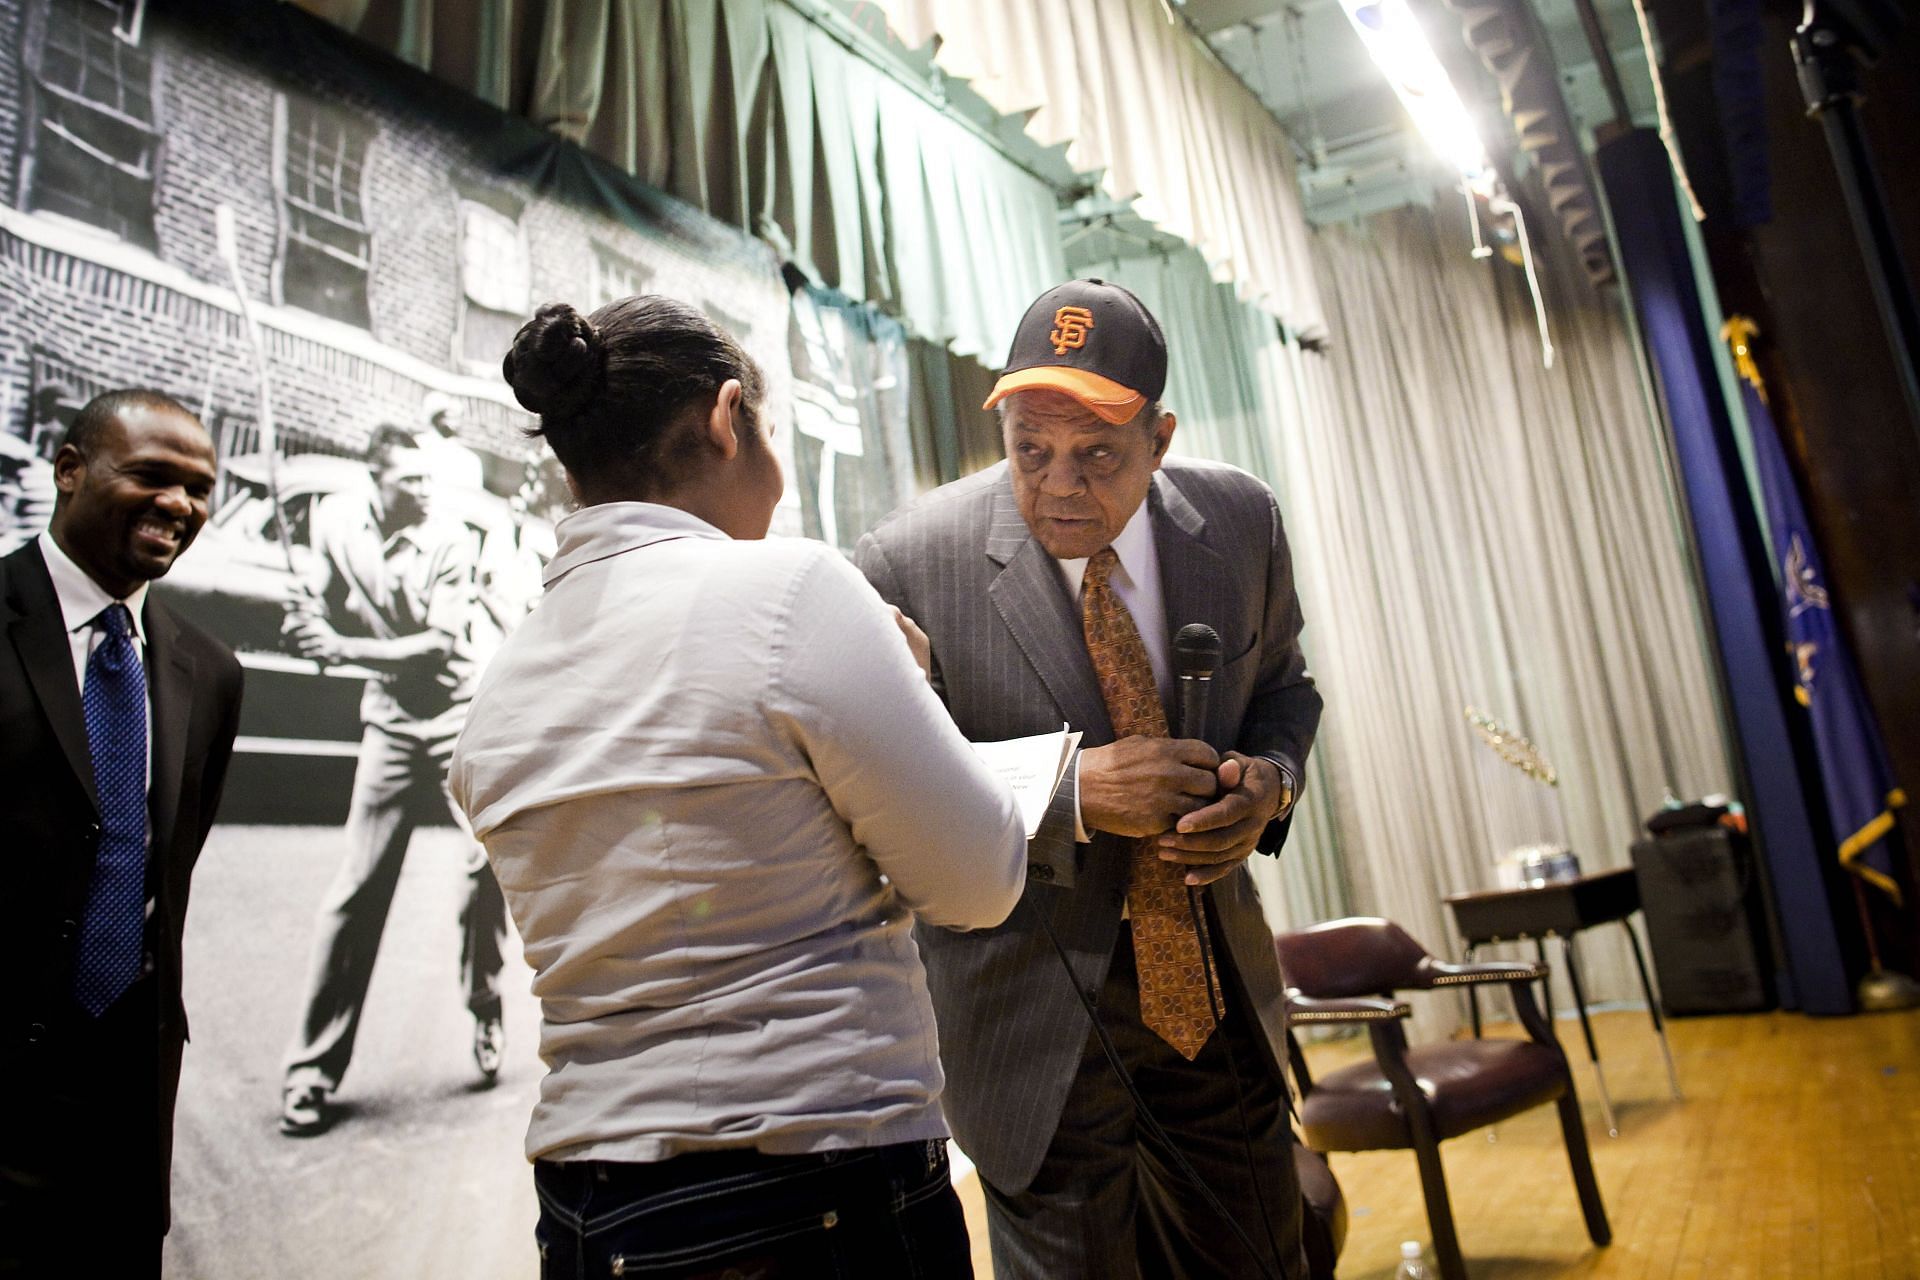 The game will honor legendary Willie Mays